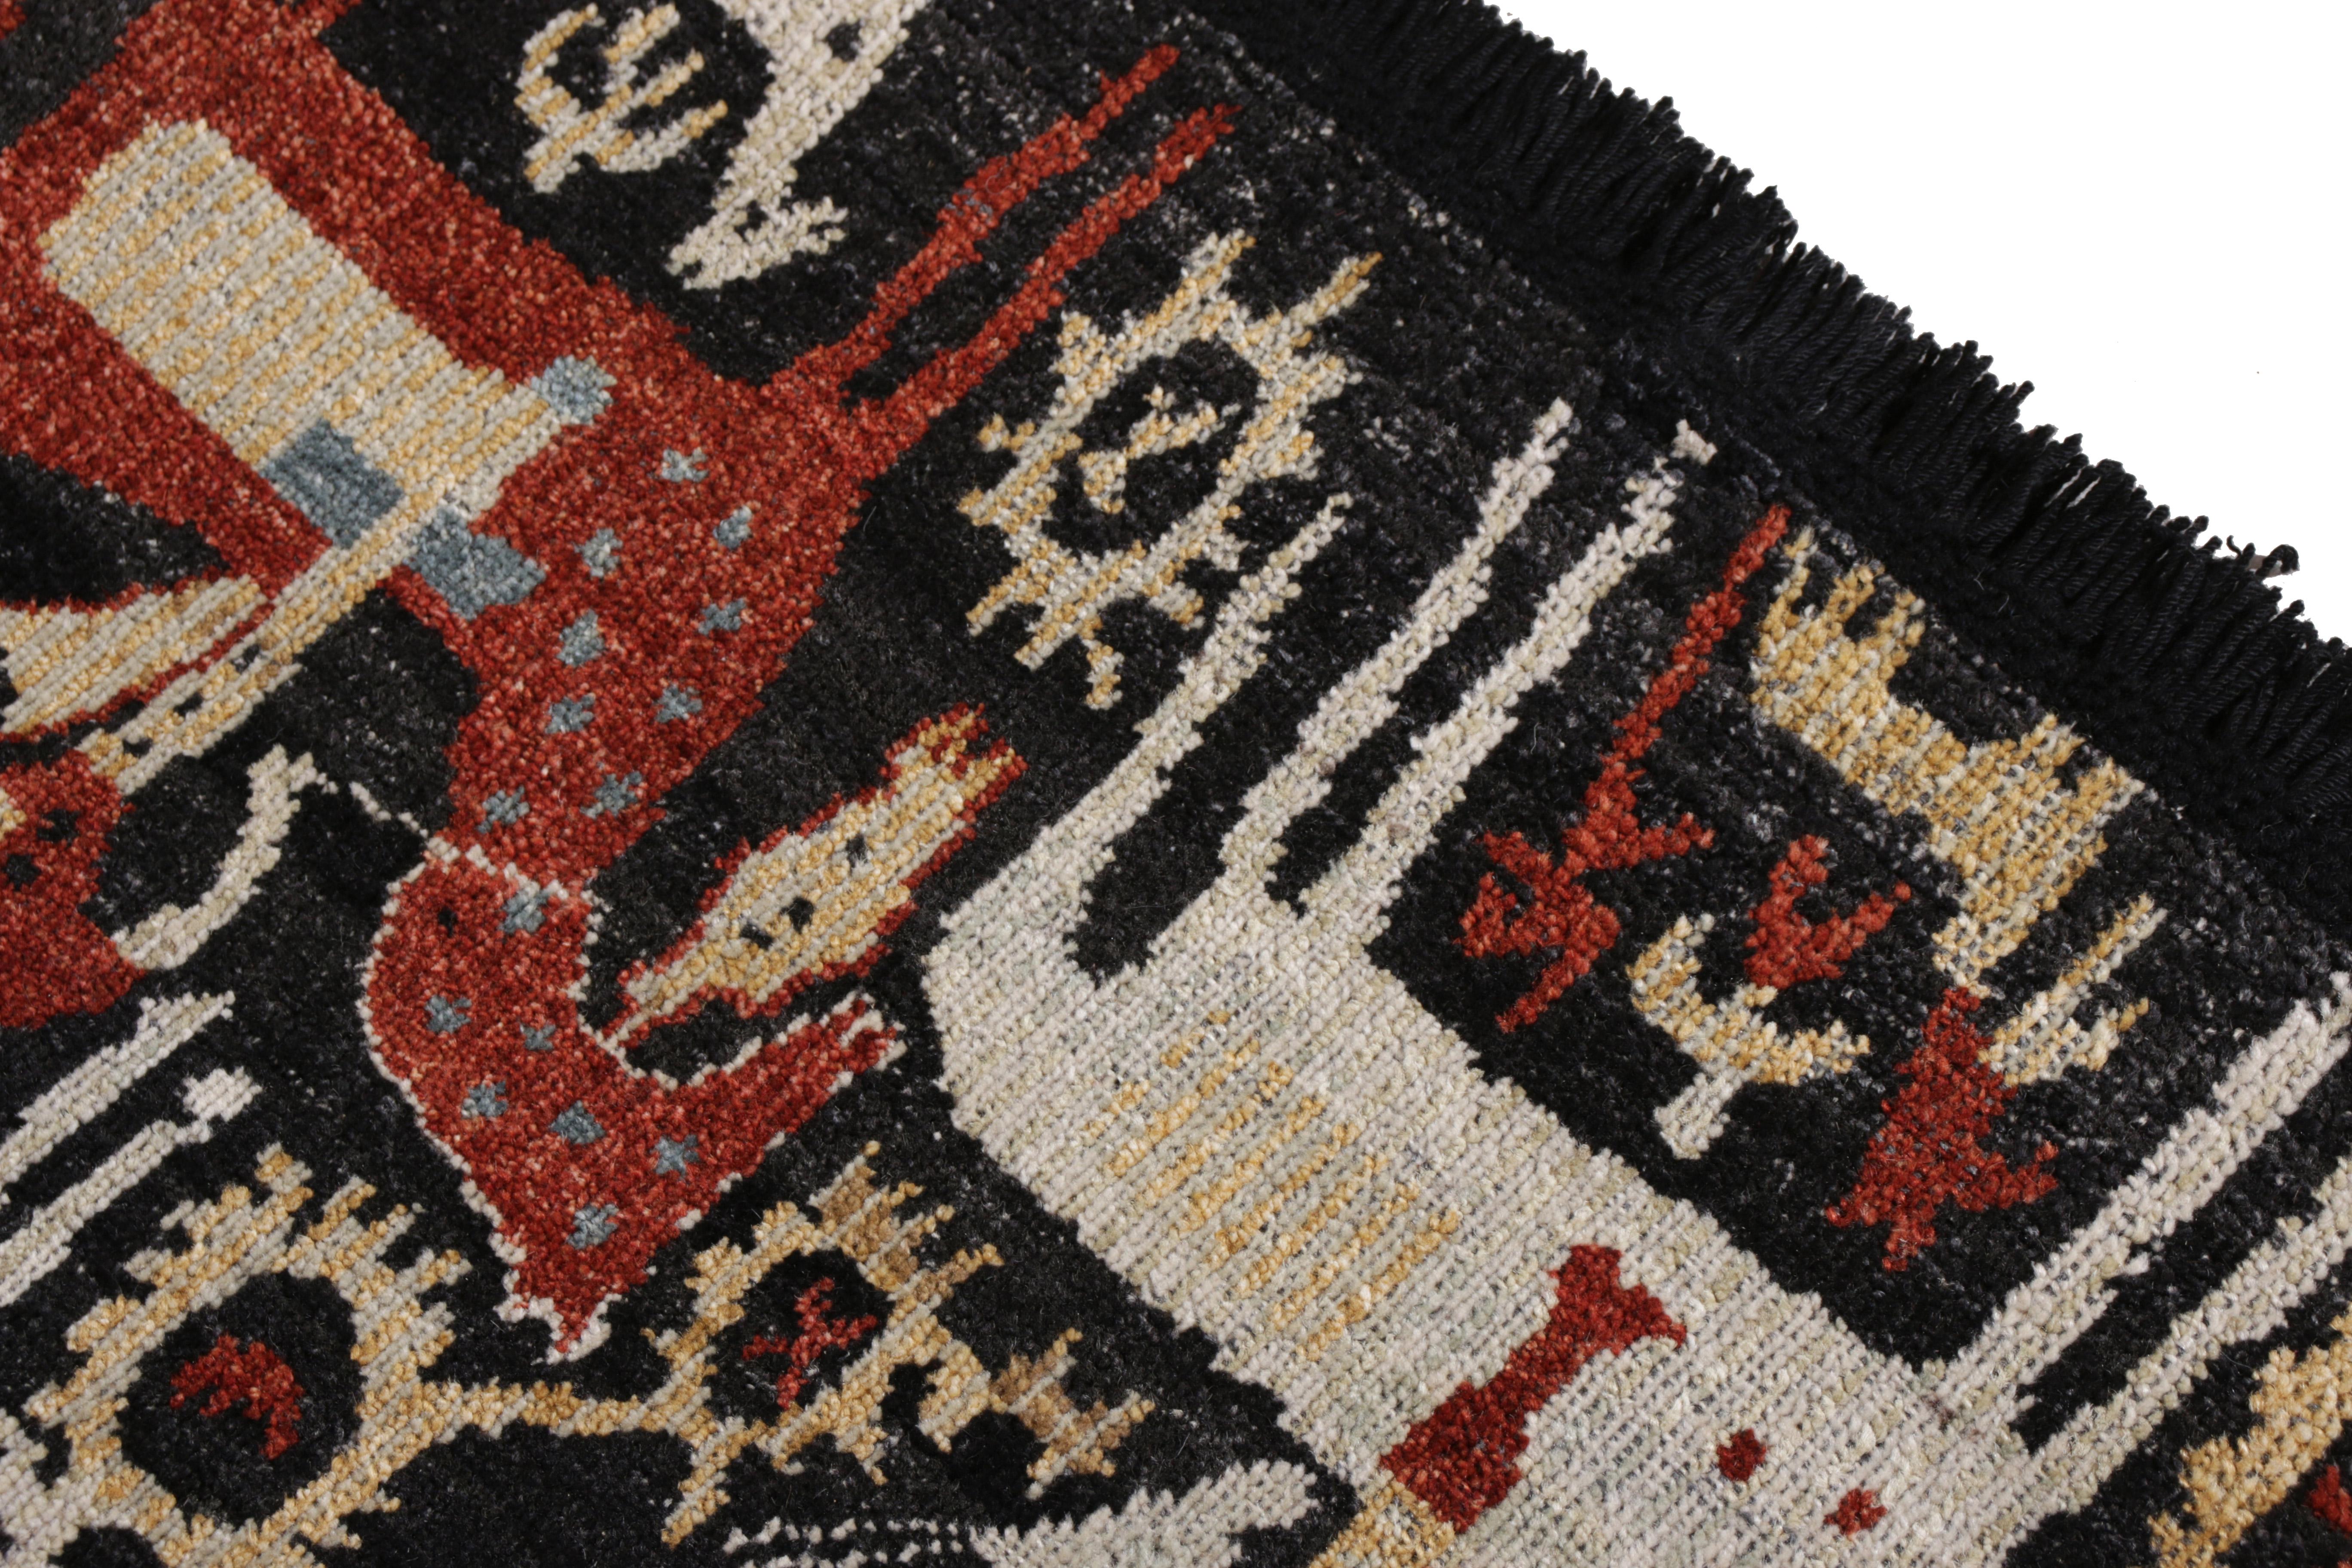 Indian Rug & Kilim's Hand Knotted Tribal Rug in Black and Red Geometric Pattern